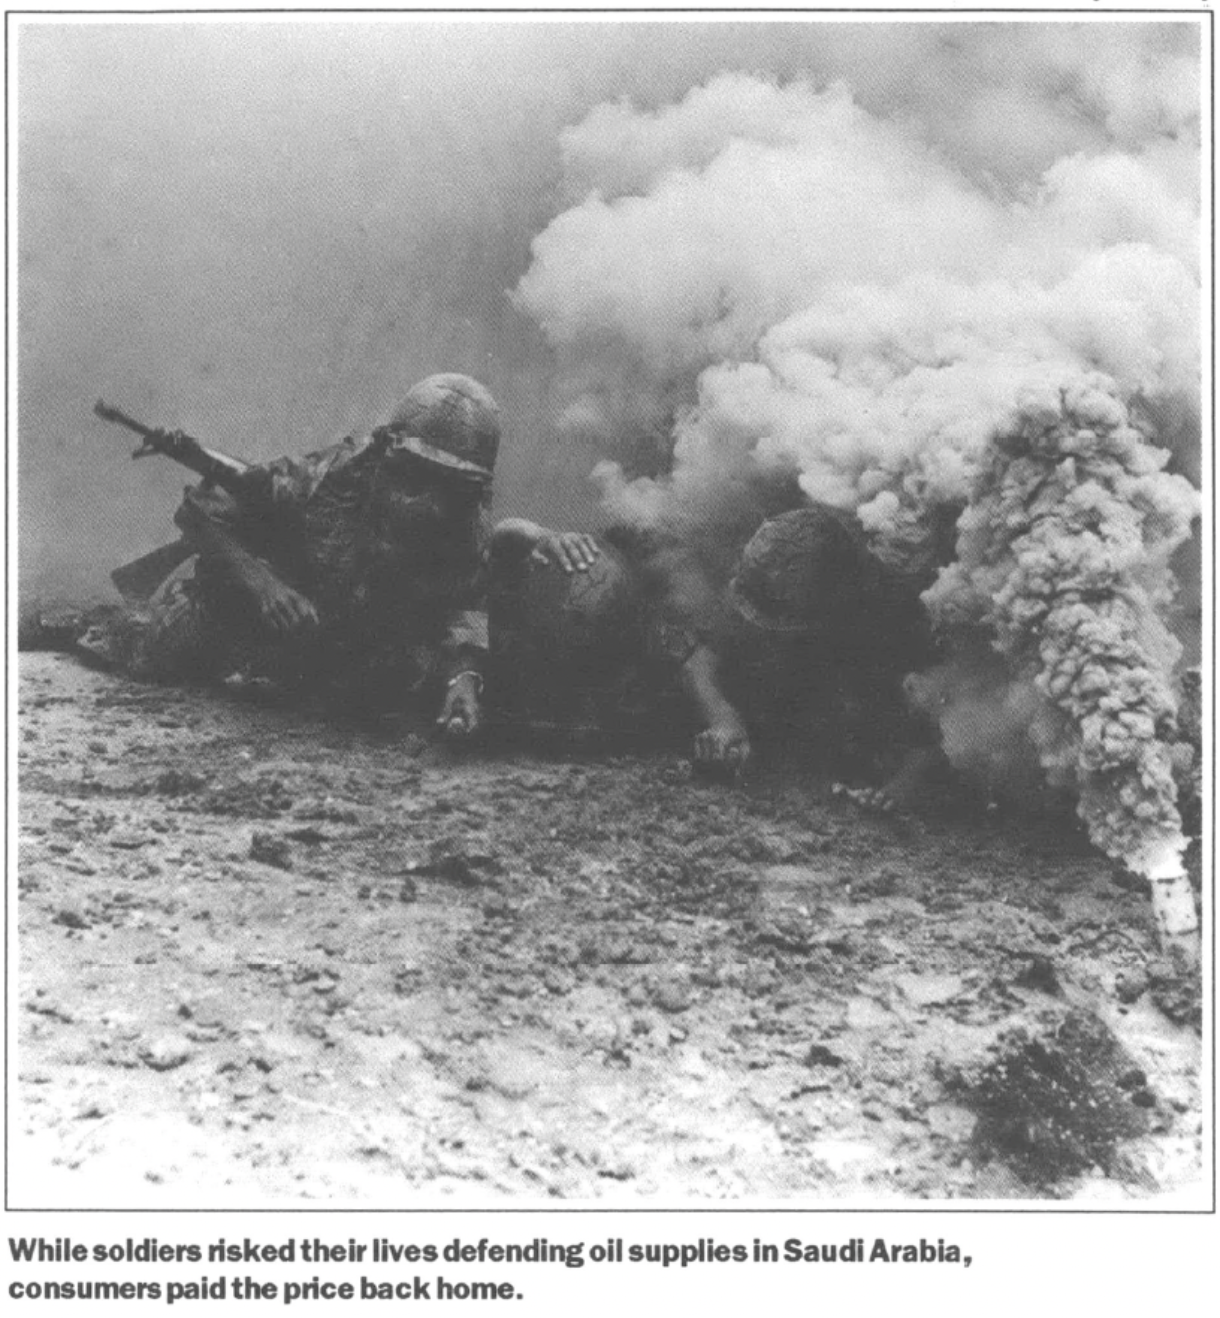 U.S. soldiers in war surrounded by smoke